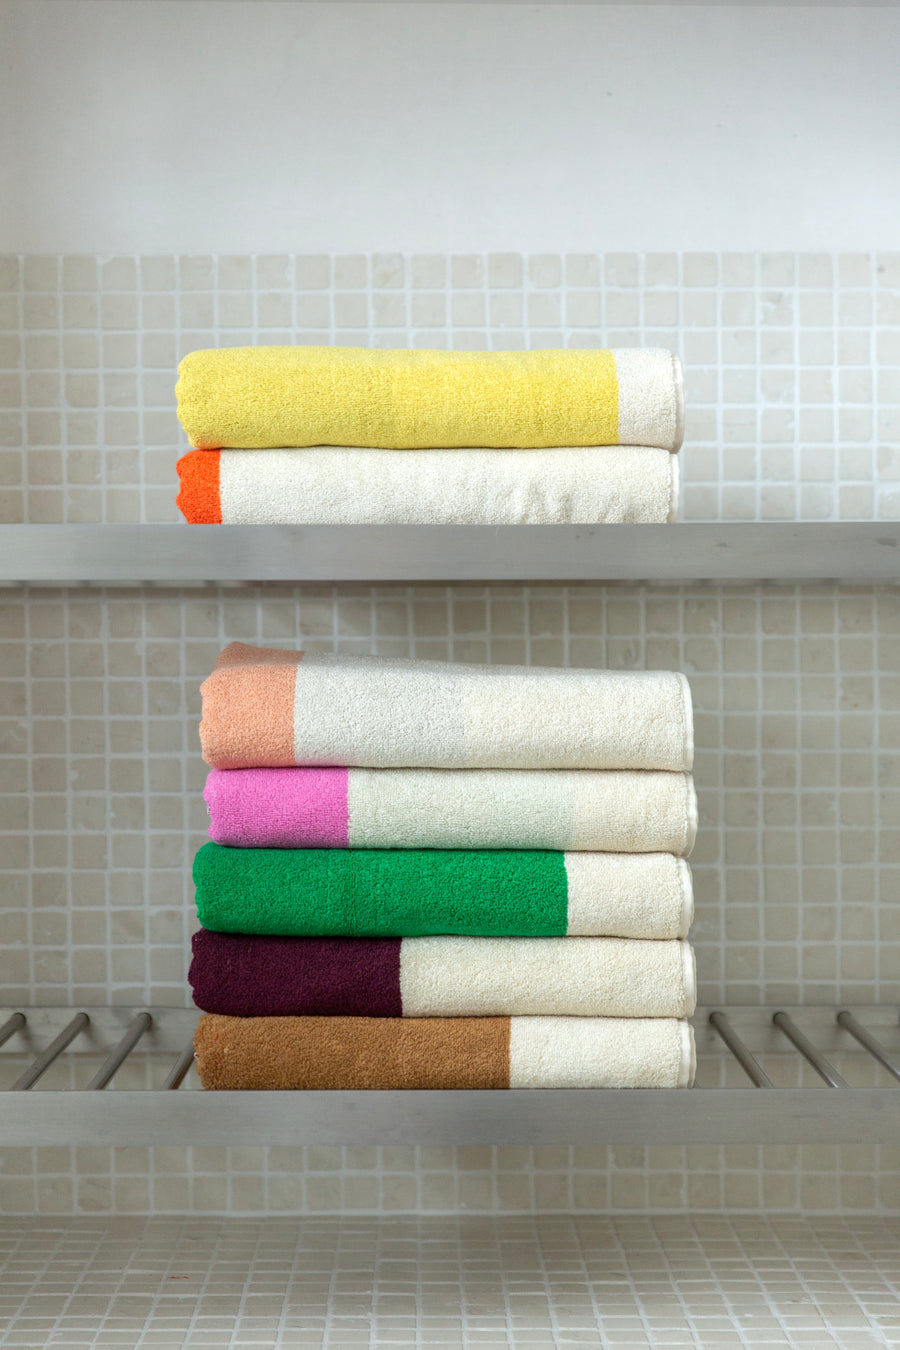 Towels in different colors